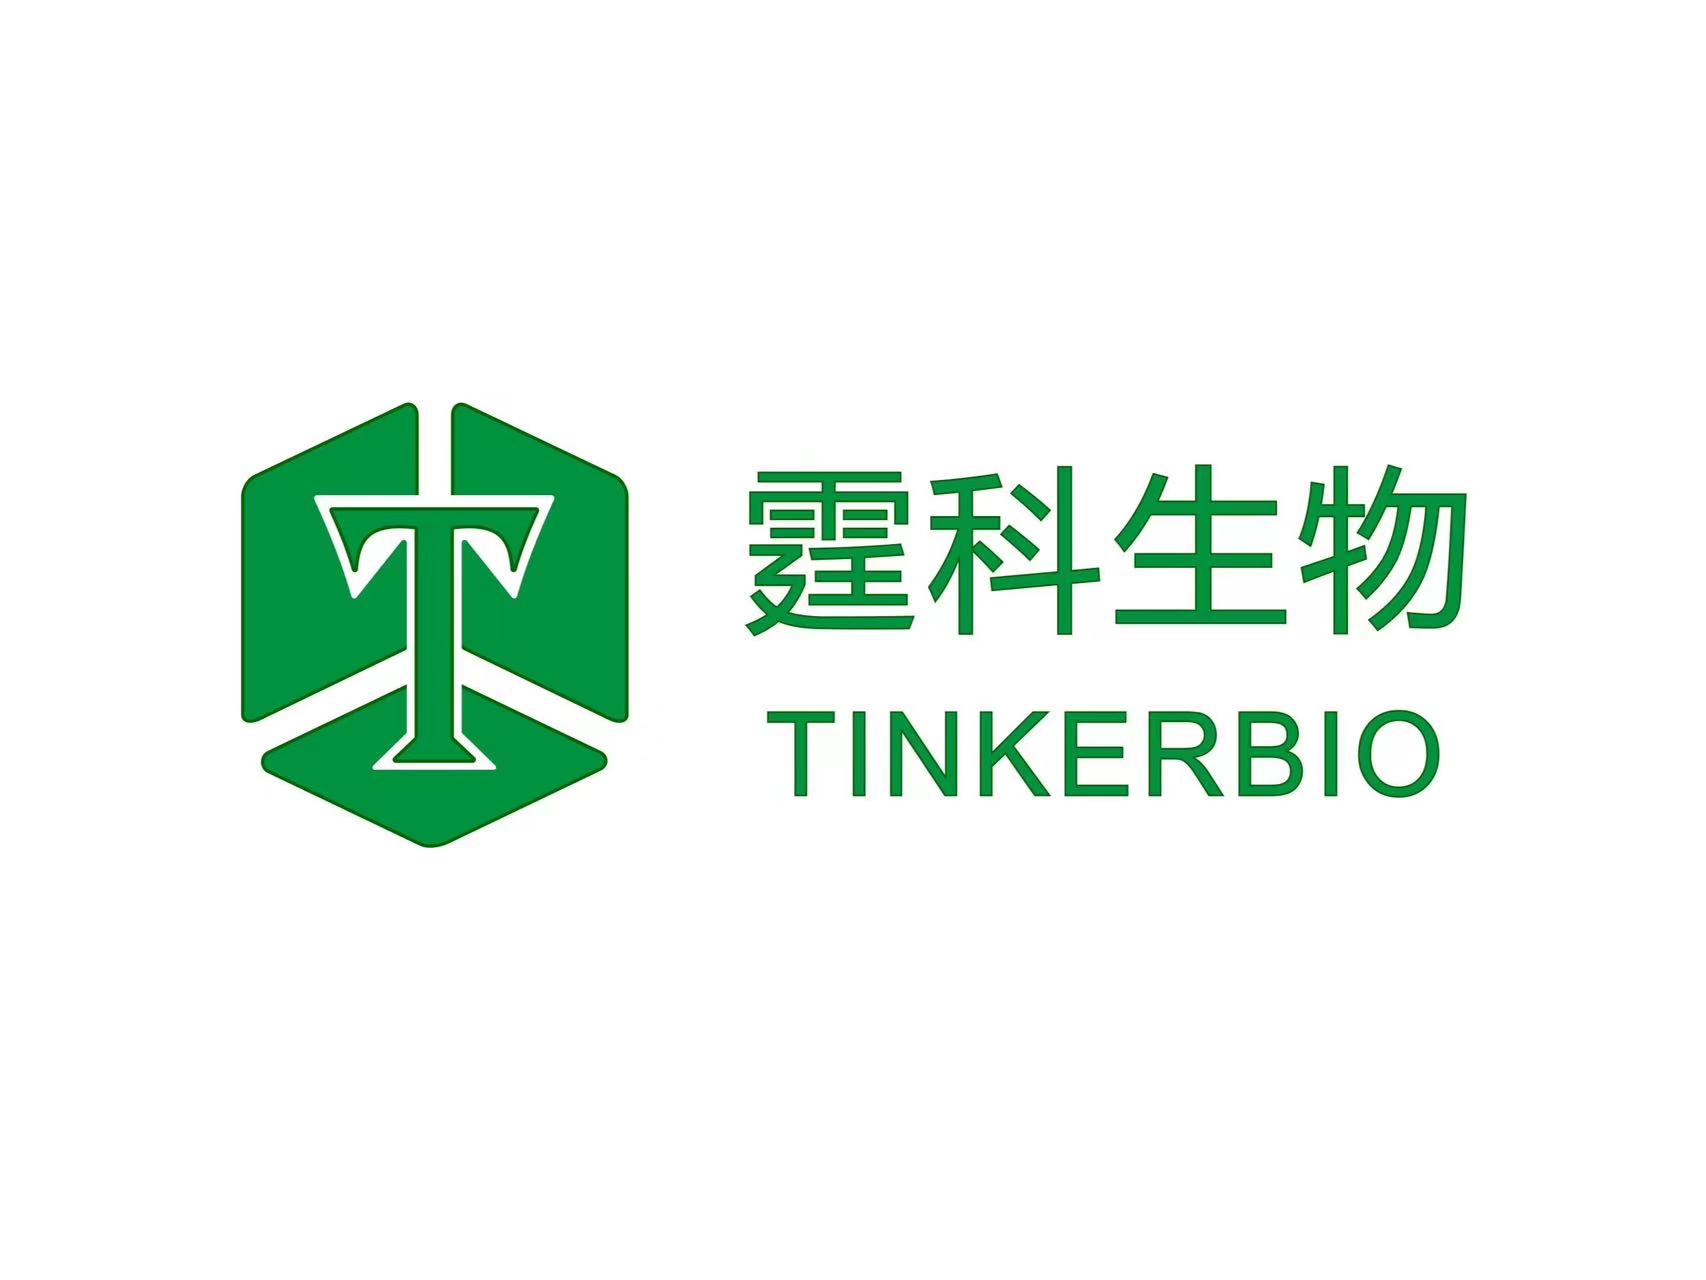 Ramping up microfluidic chip production! TinkerBio Completed Tens of Millions of RMB Series A+ Financing